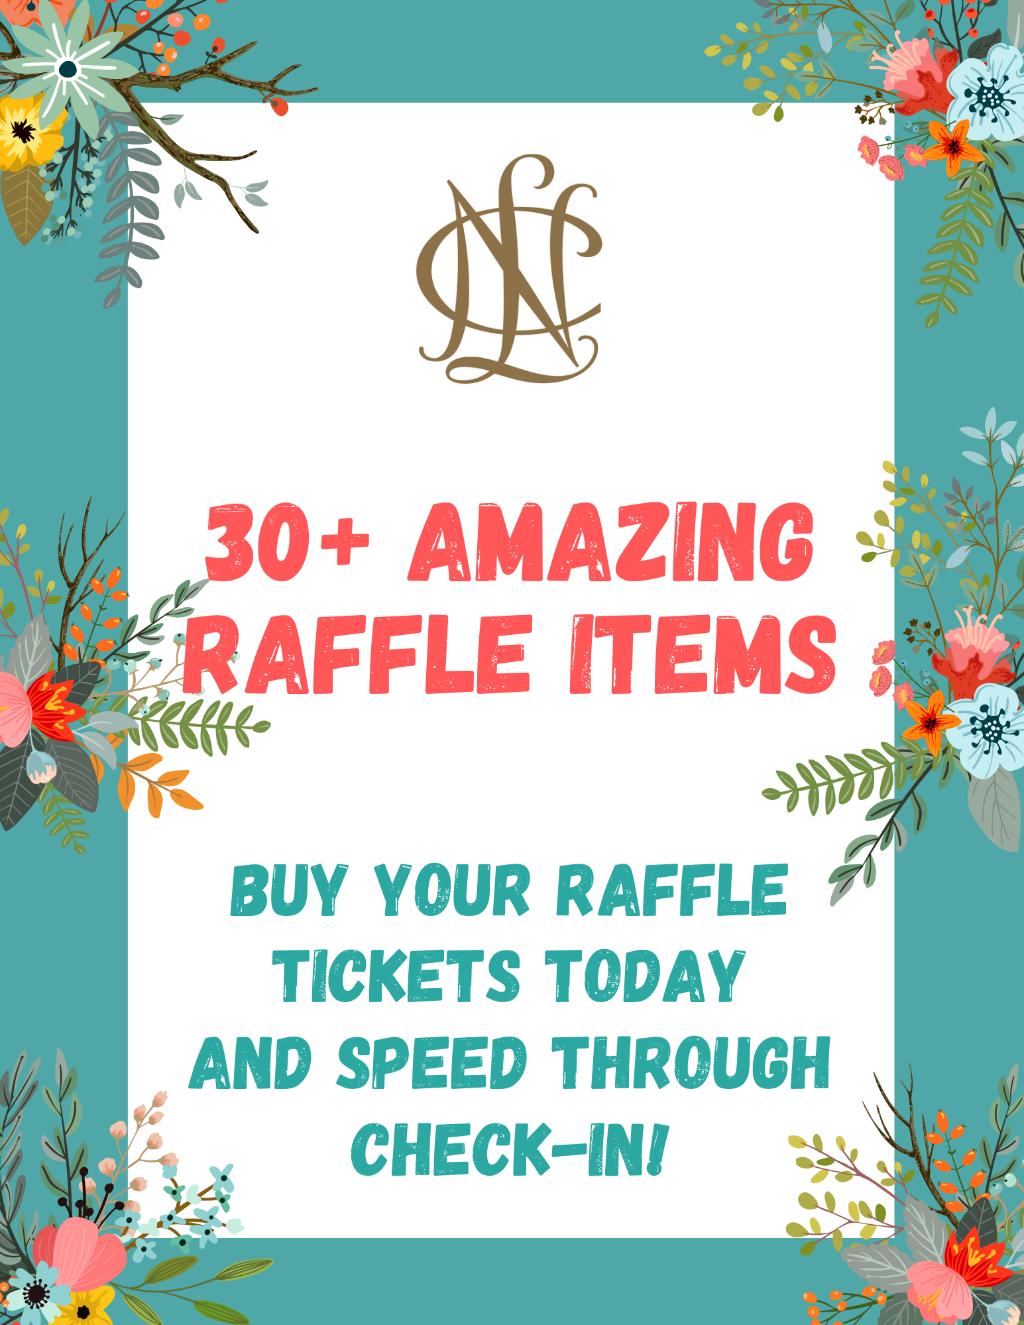 Make Sure to Buy Tickets for These Amazing Items!